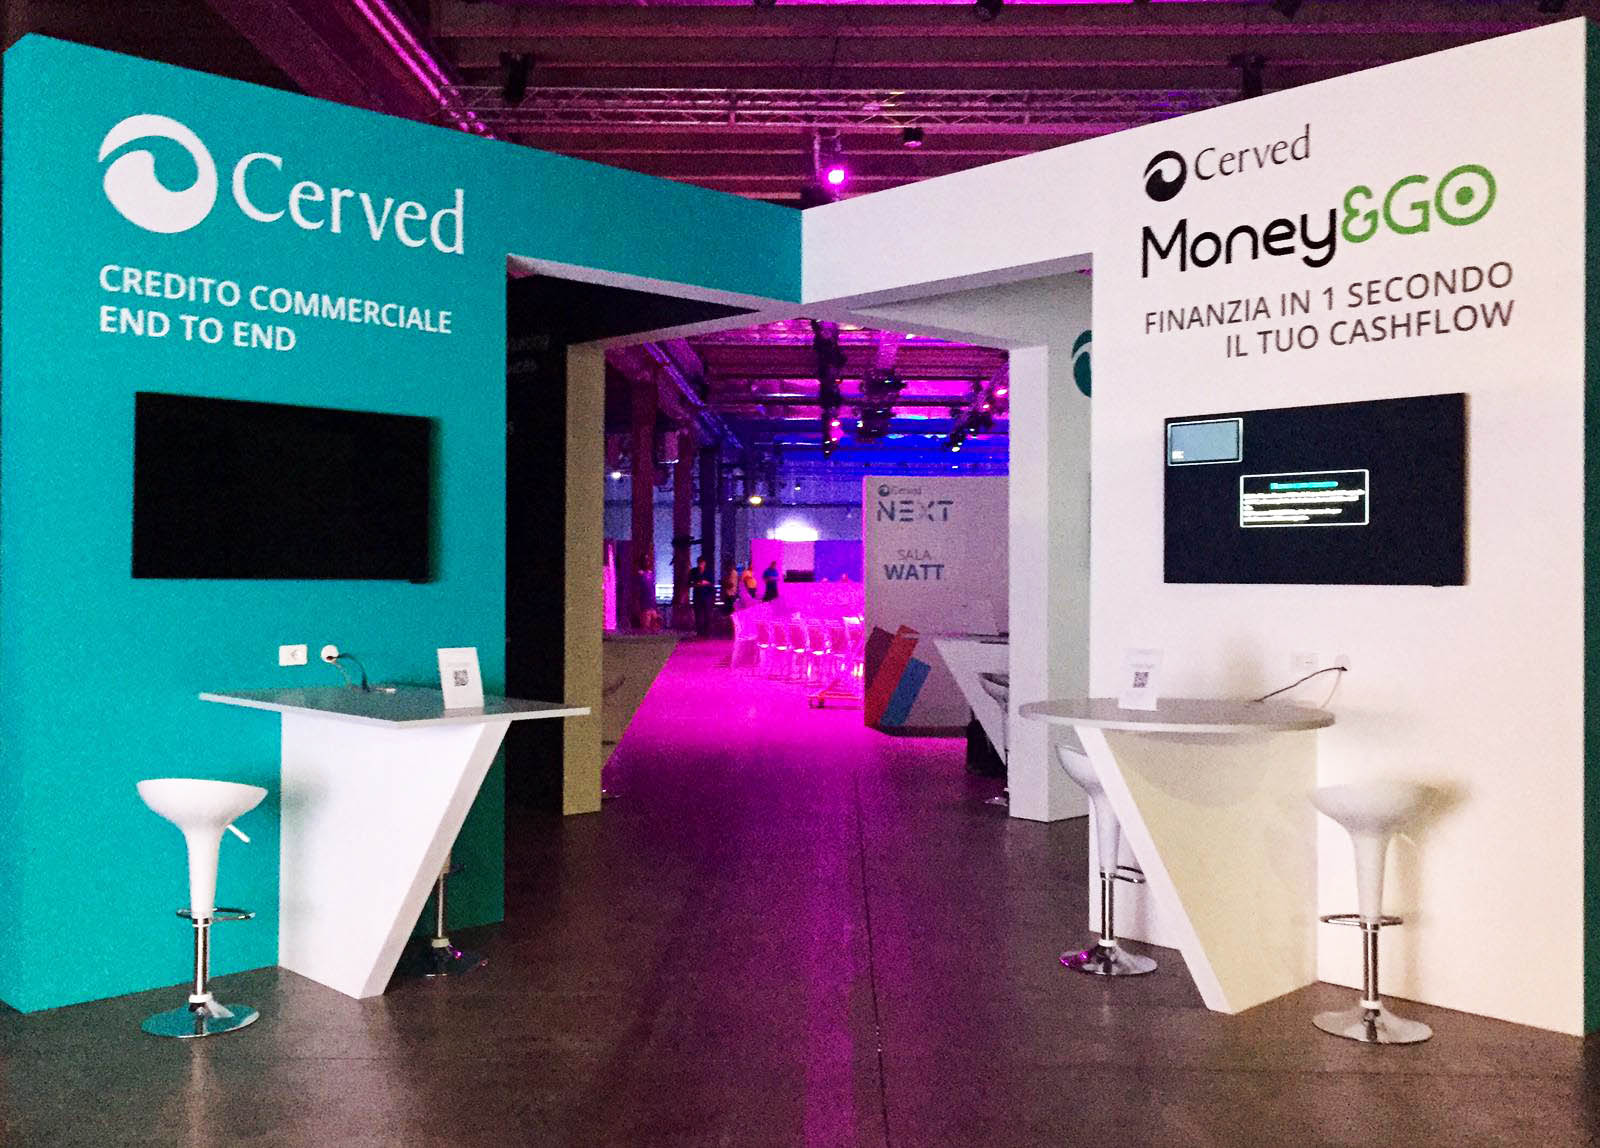 Cerved Next 2019 - "Data driven" conference in via Watt 15 - 4